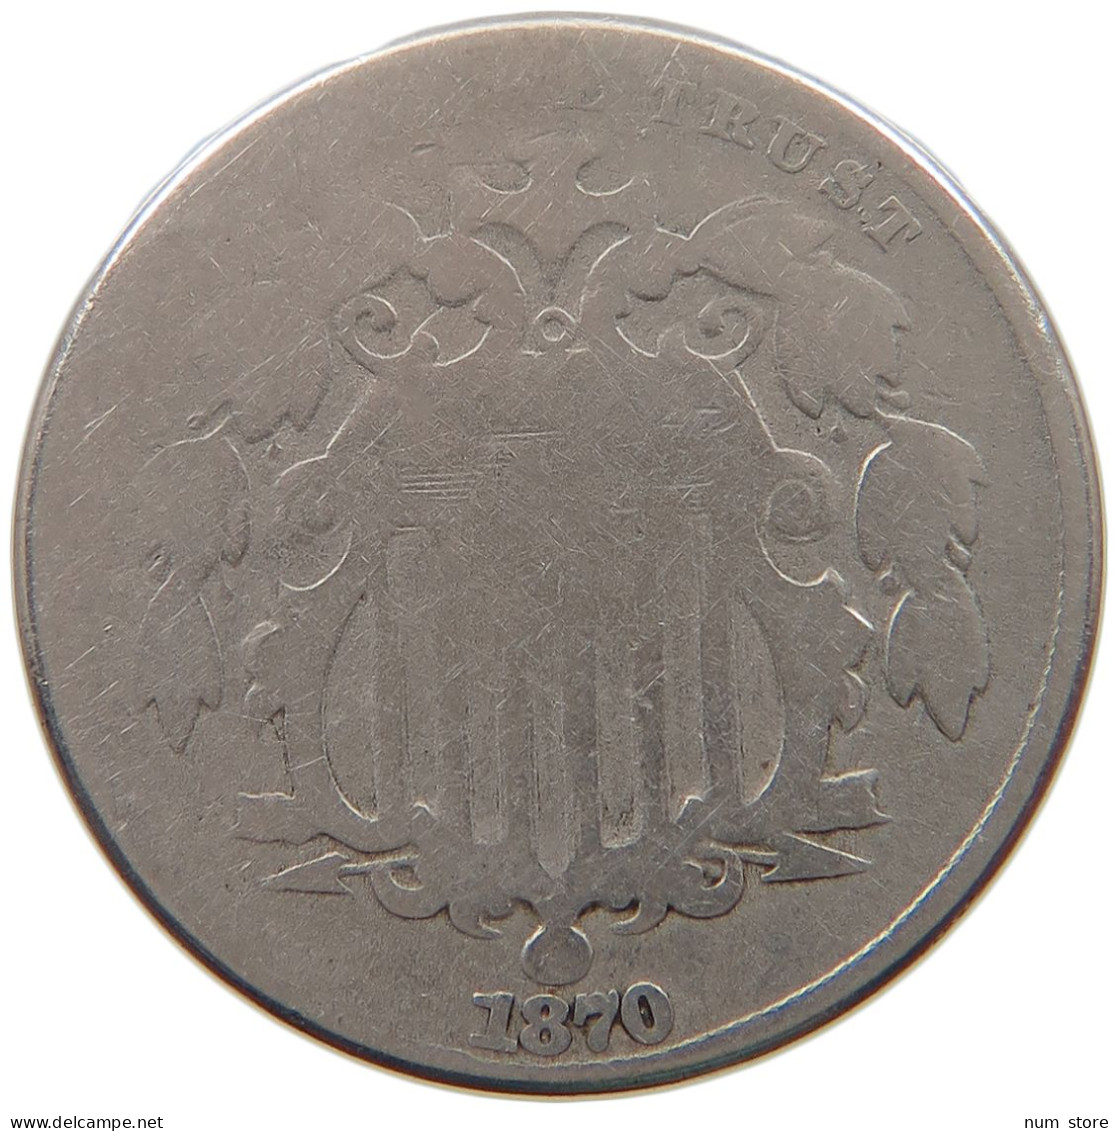 UNITED STATES OF AMERICA NICKEL 1870 SHIELD #a046 0675 - 1866-83: Shield (Écusson)